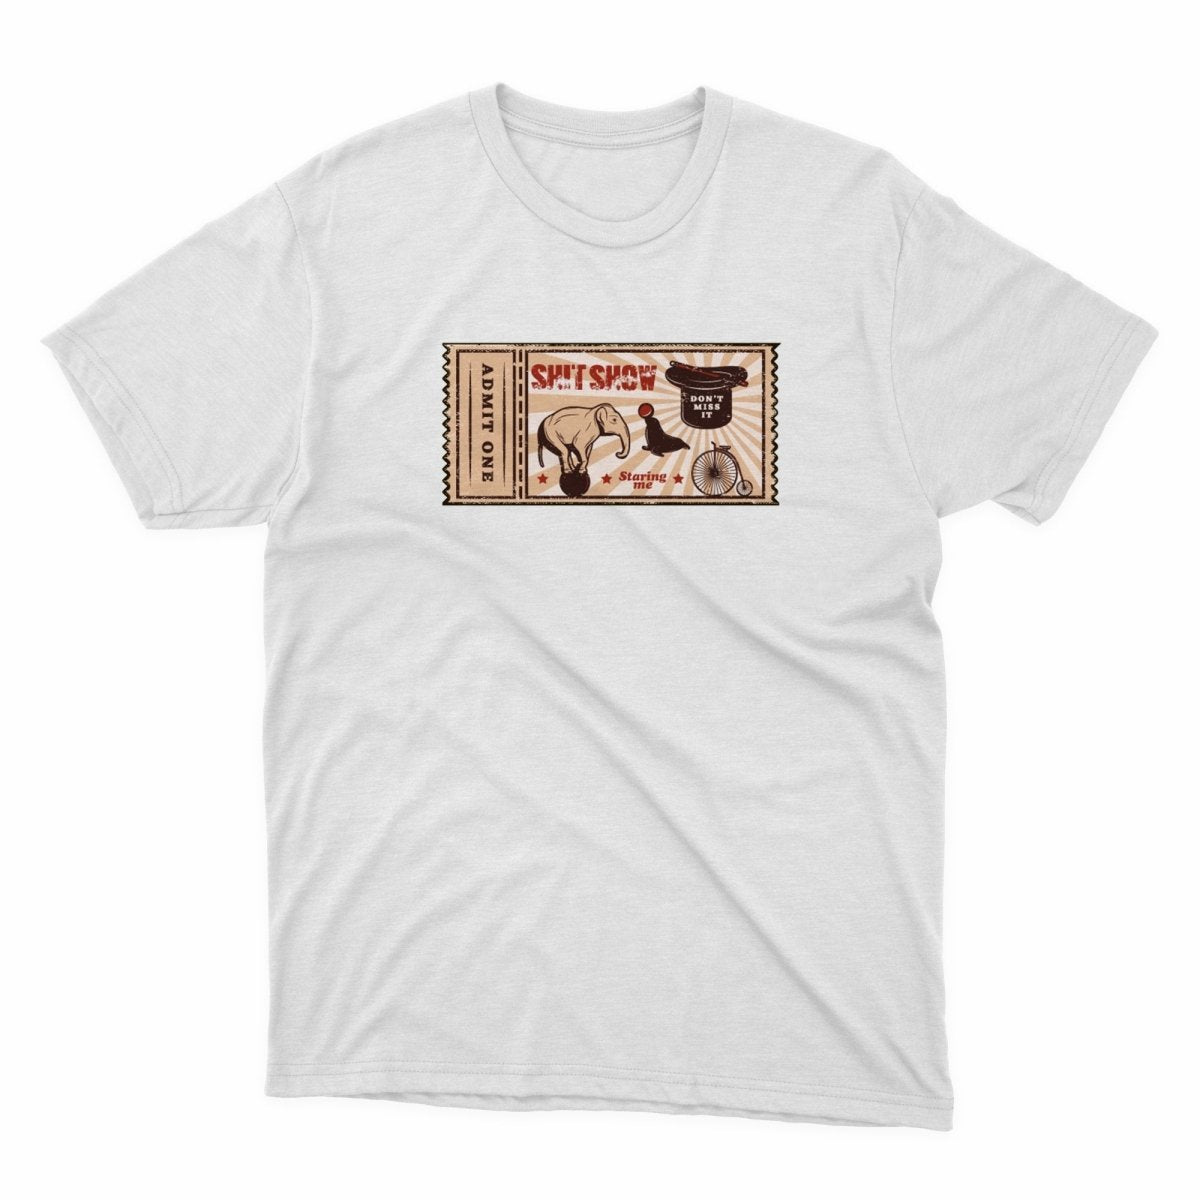 Ticket To The Shit Show Vintage Shirt - stickerbullTicket To The Shit Show Vintage ShirtShirtsPrintifystickerbull20010191484899476396WhiteSa white t - shirt with a stamp on it